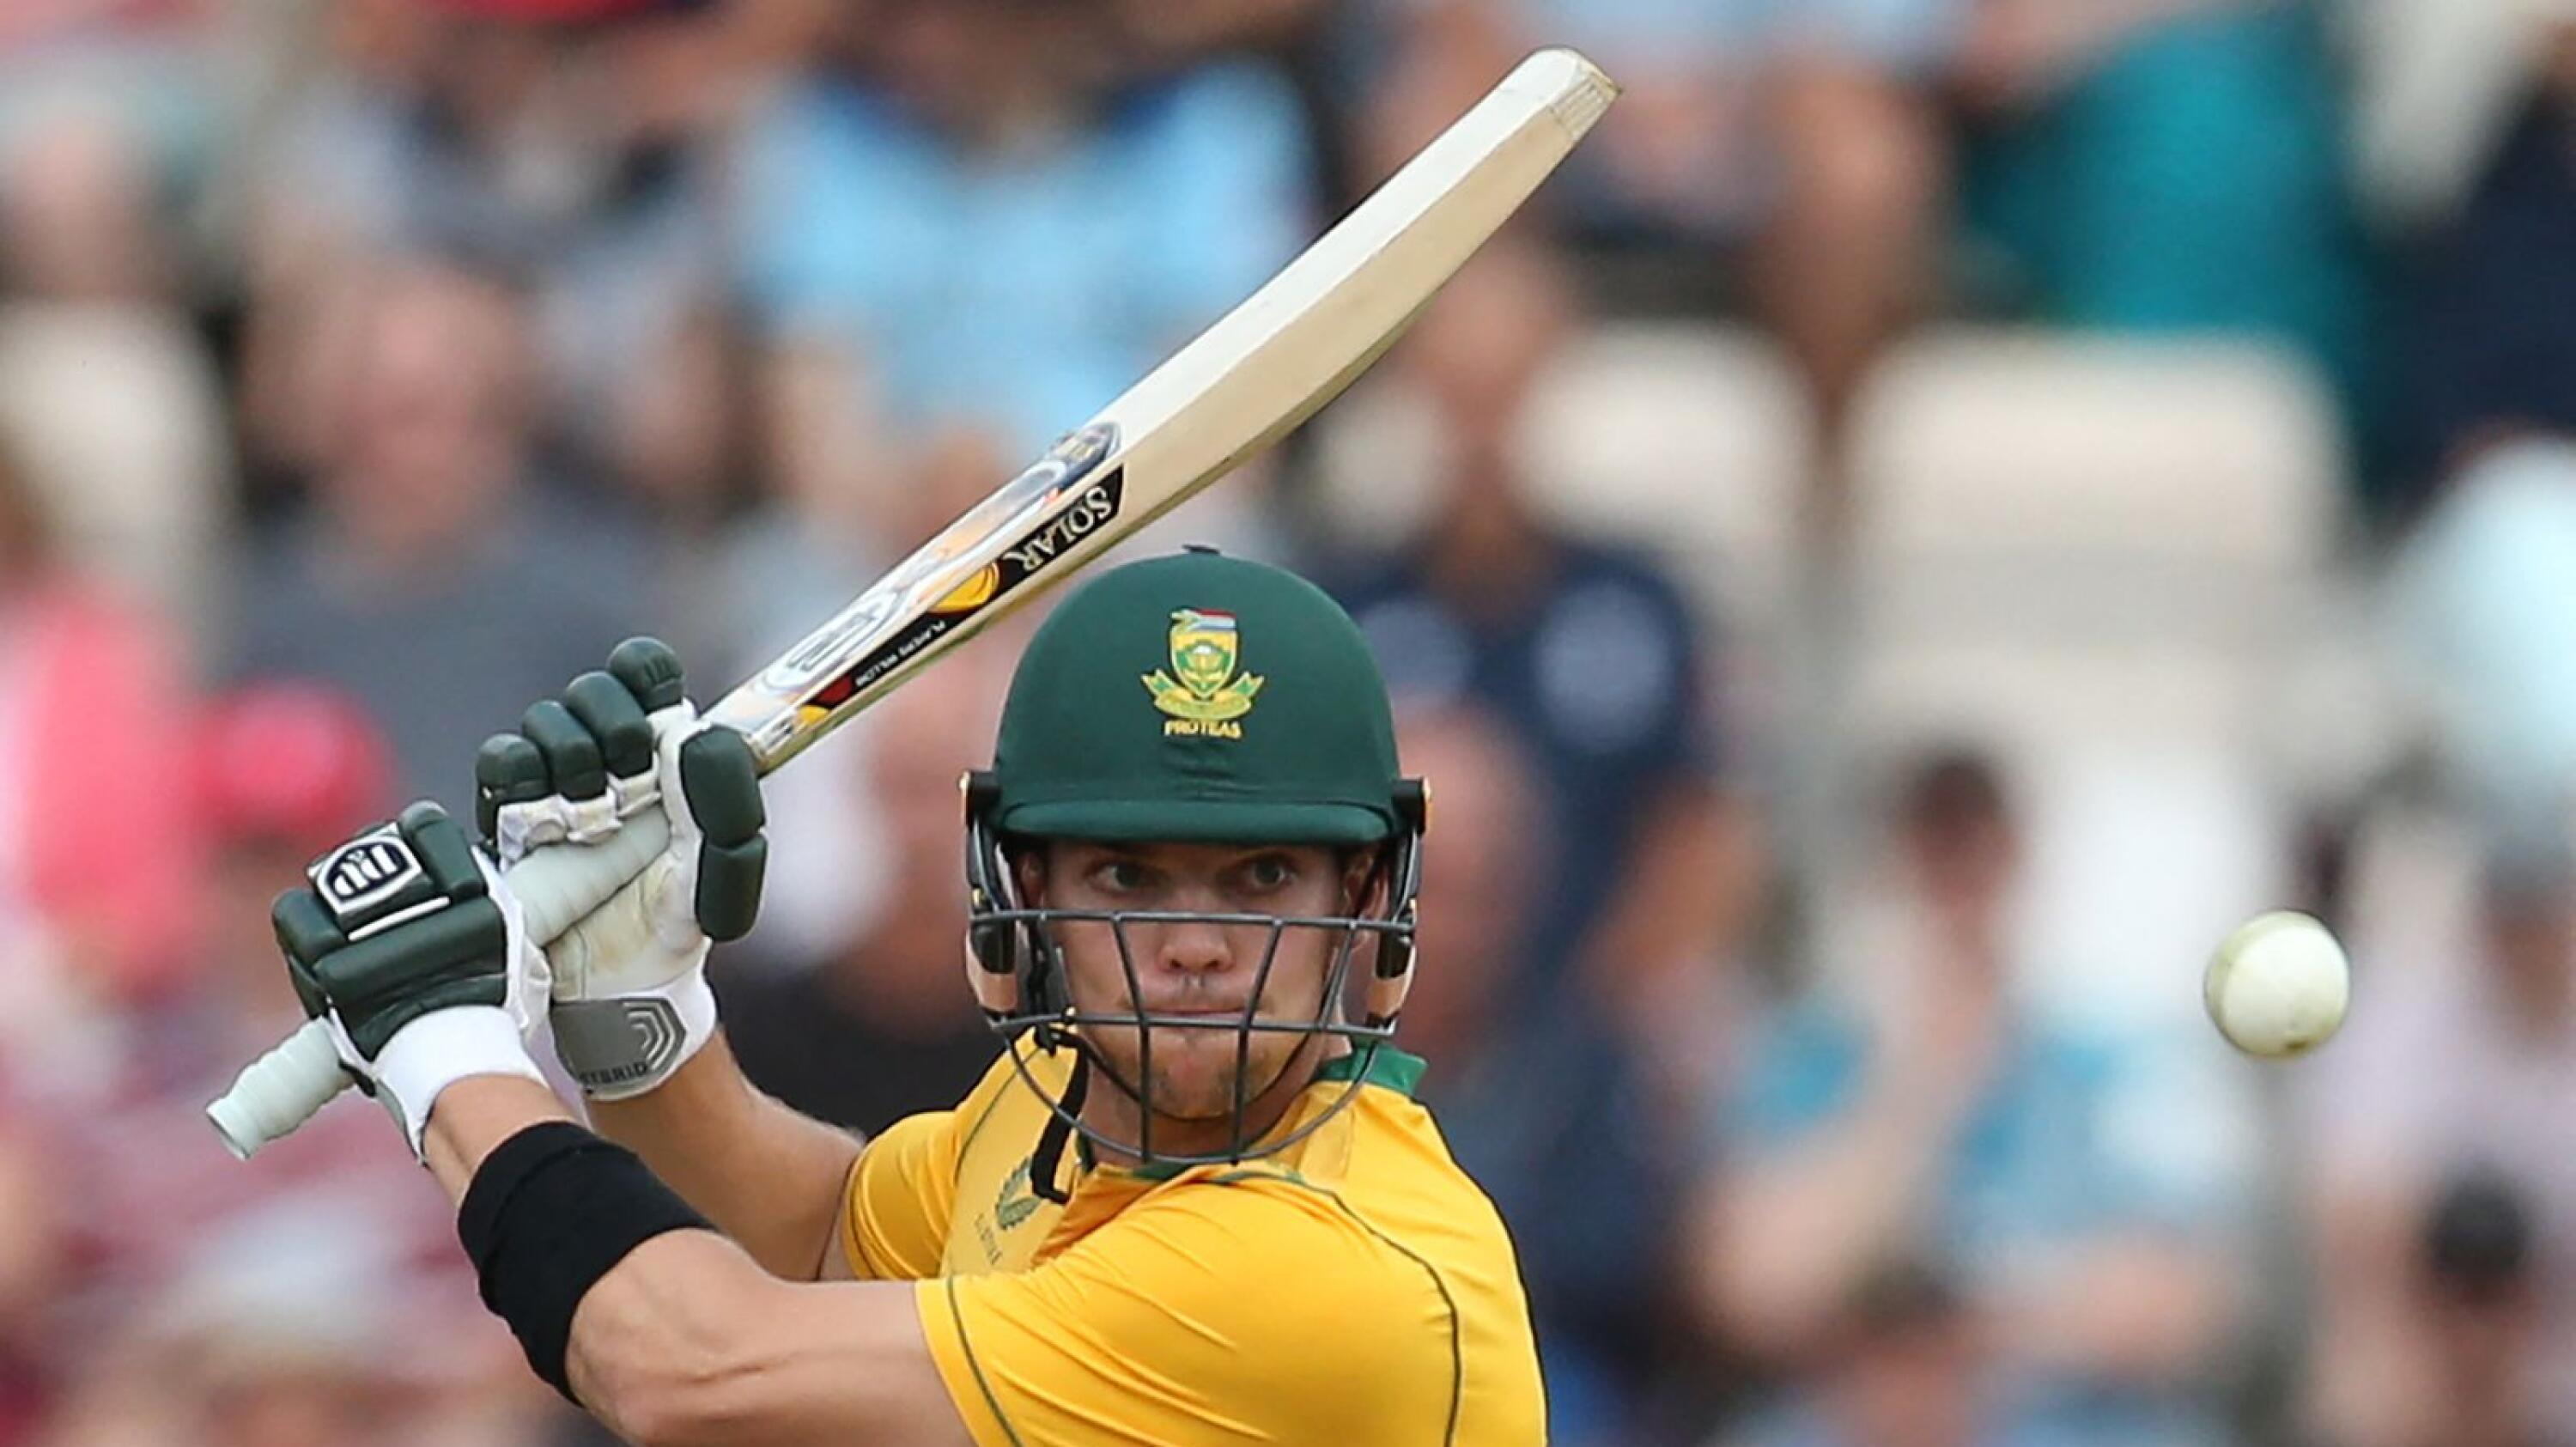 South Africa's Tristan Stubbs plays a shot during a T20 international cricket match against England in the United Kingdom